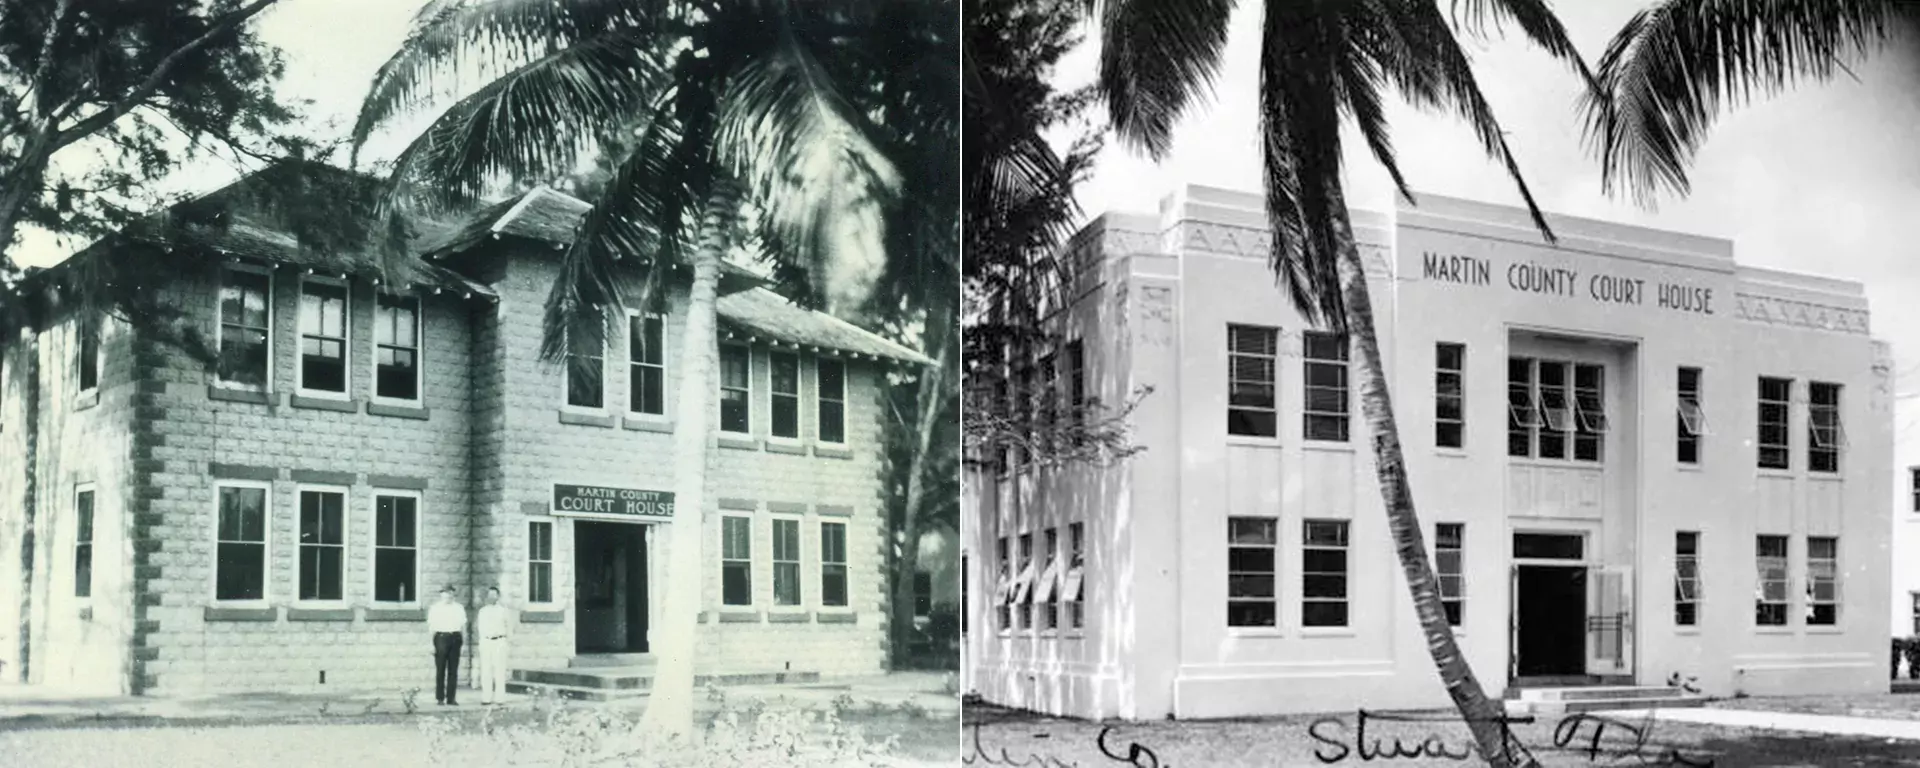 The historic Martin County Courthouse, photos courtesy of the Florida State Archives 